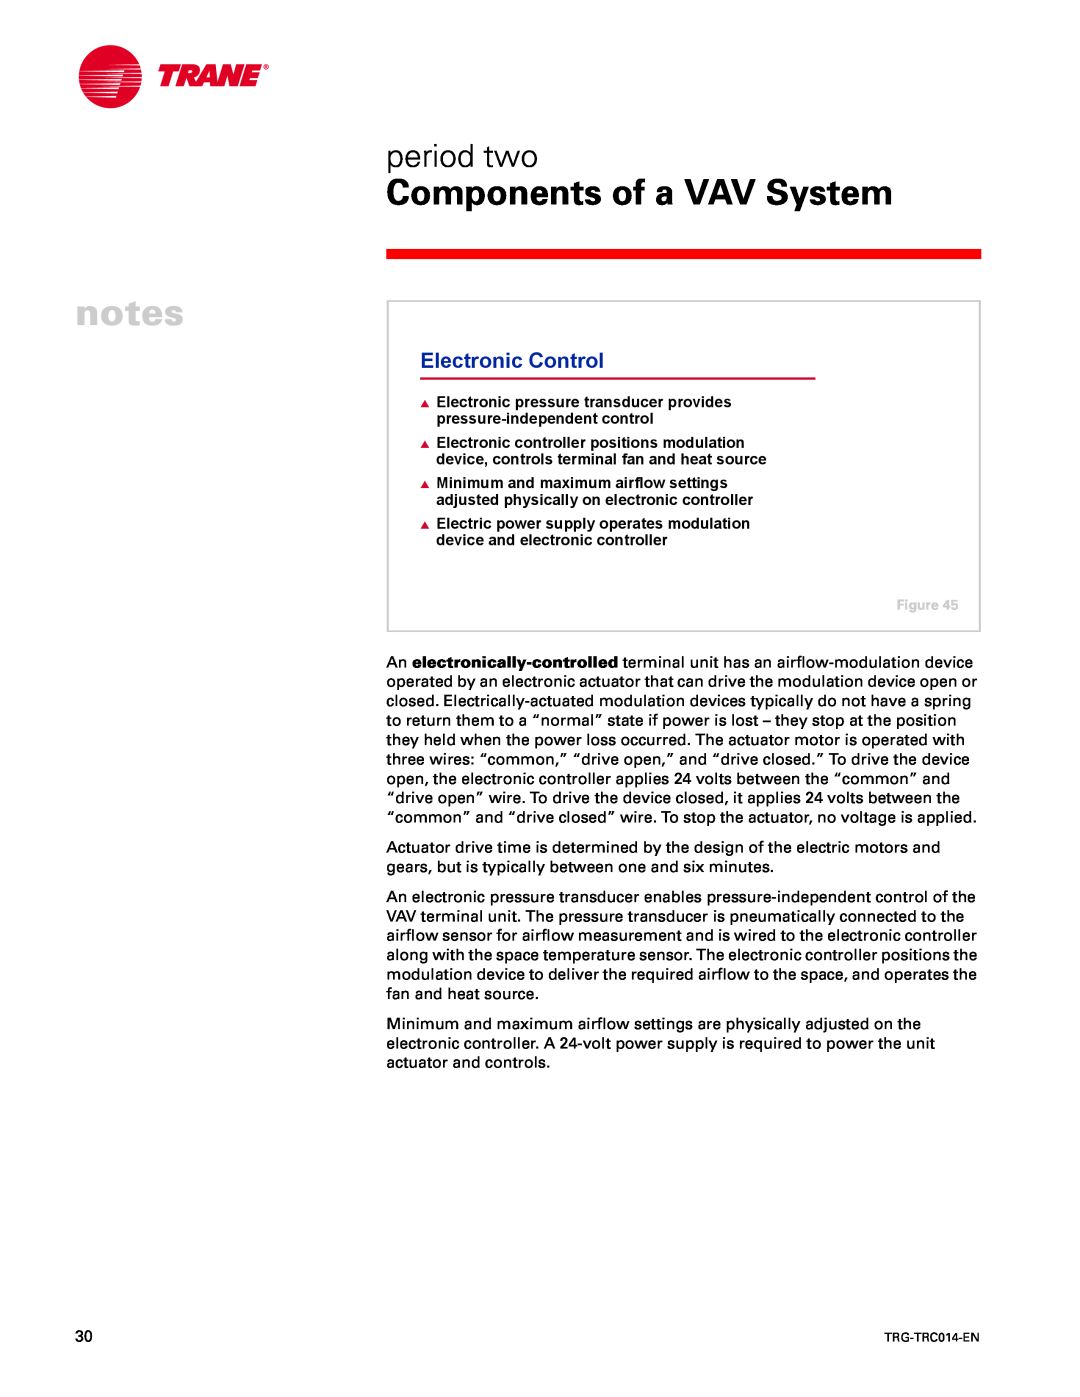 Trane TRG-TRC014-EN manual Electronic Control, Components of a VAV System, period two 